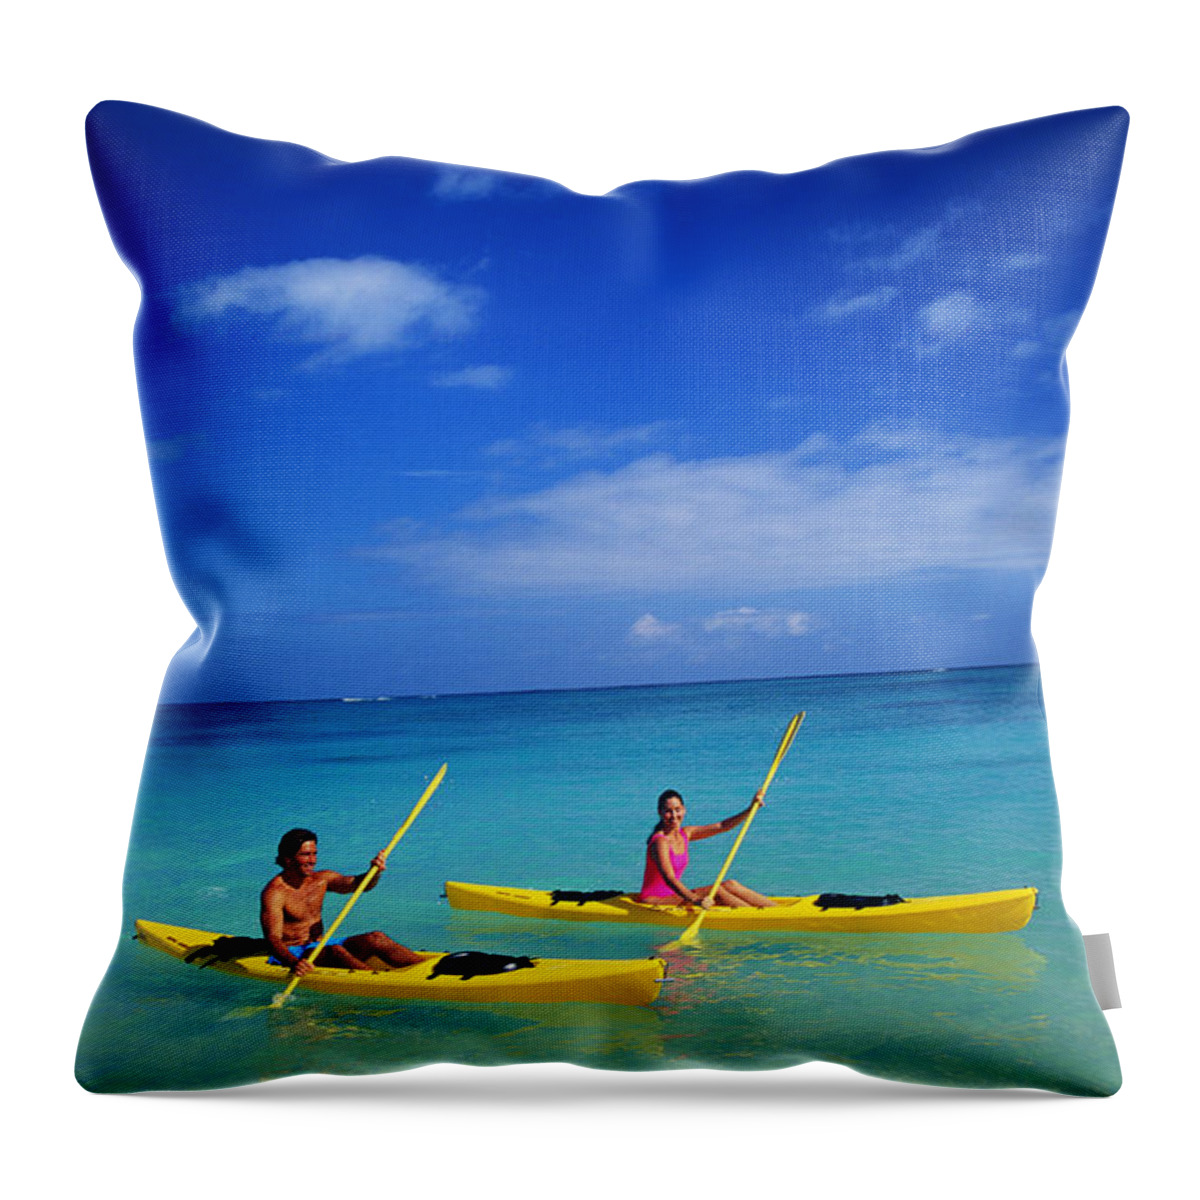 Above Throw Pillow featuring the photograph Couple Paddling #2 by Kyle Rothenborg - Printscapes